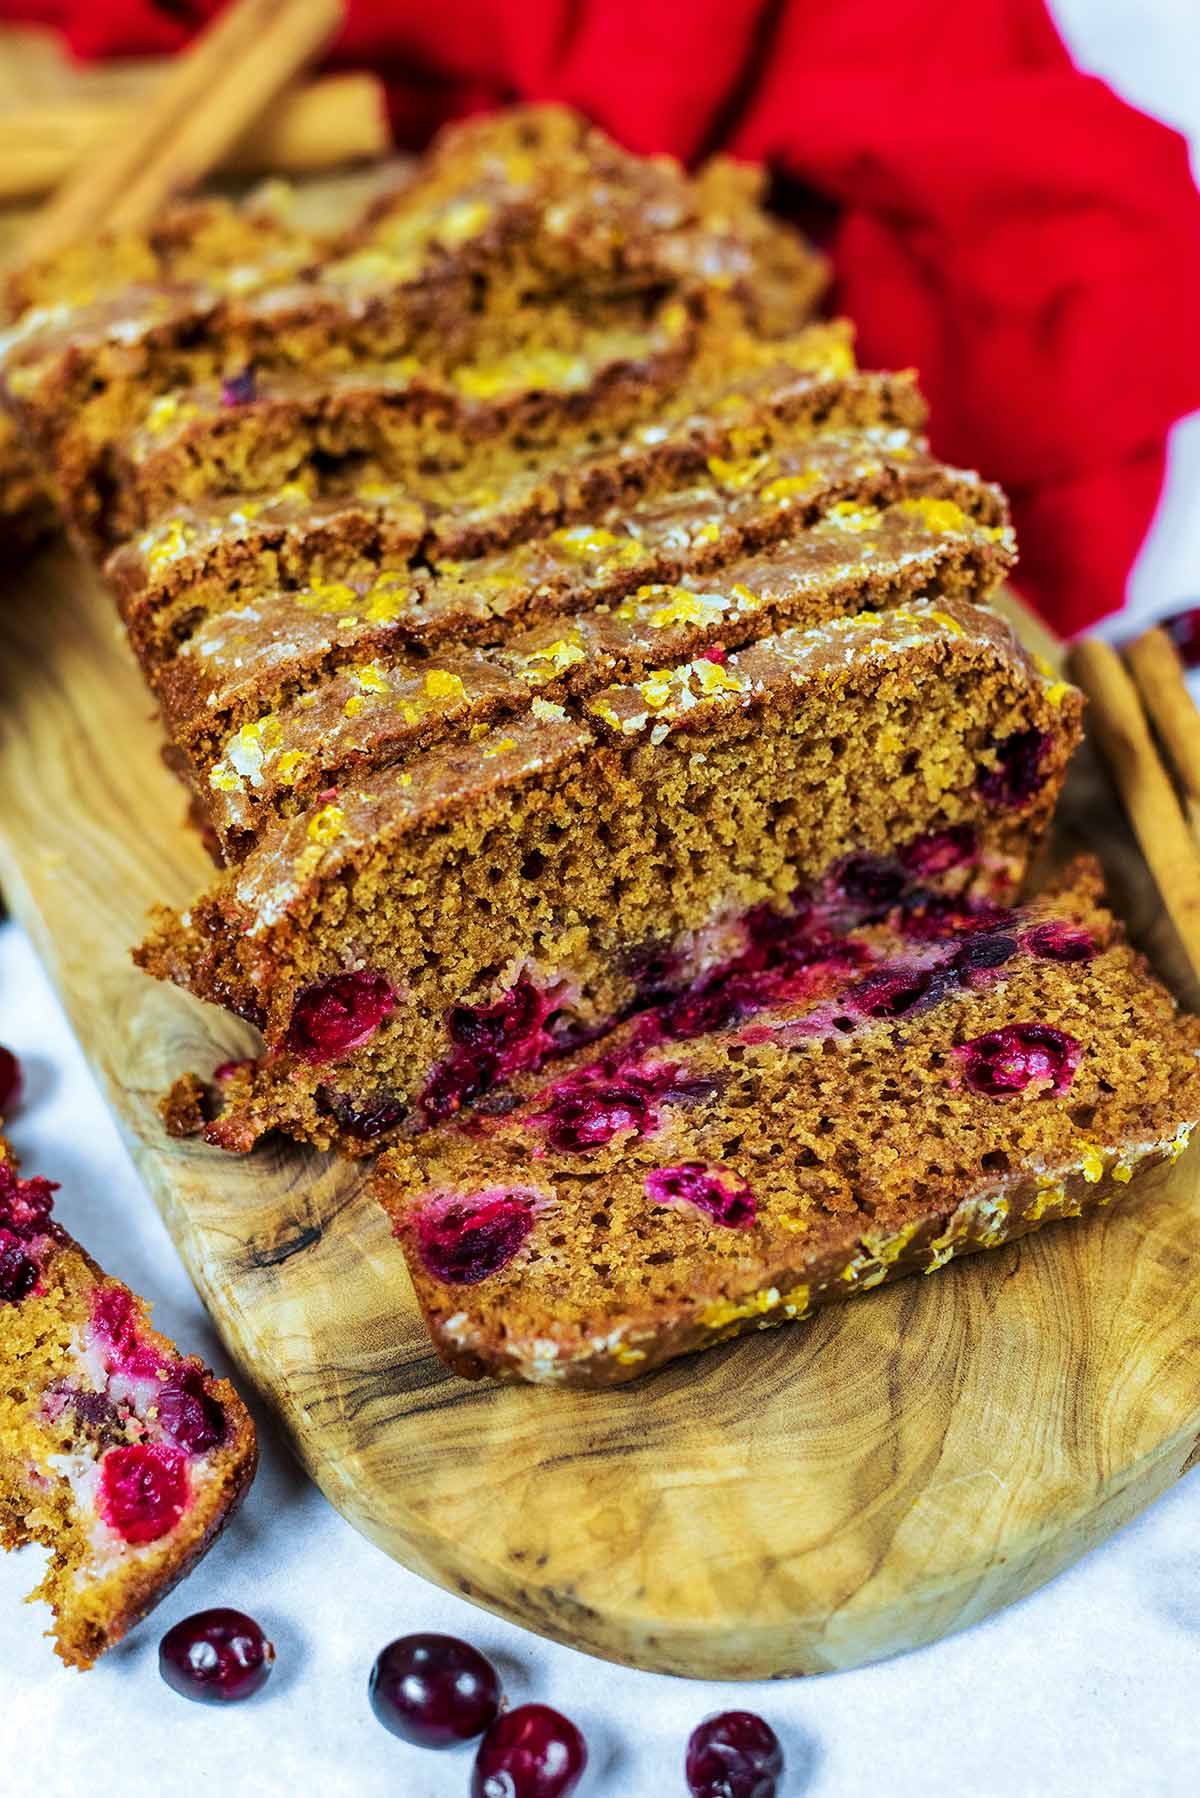 Slices of cranberry loaf on a board next to a red towel.